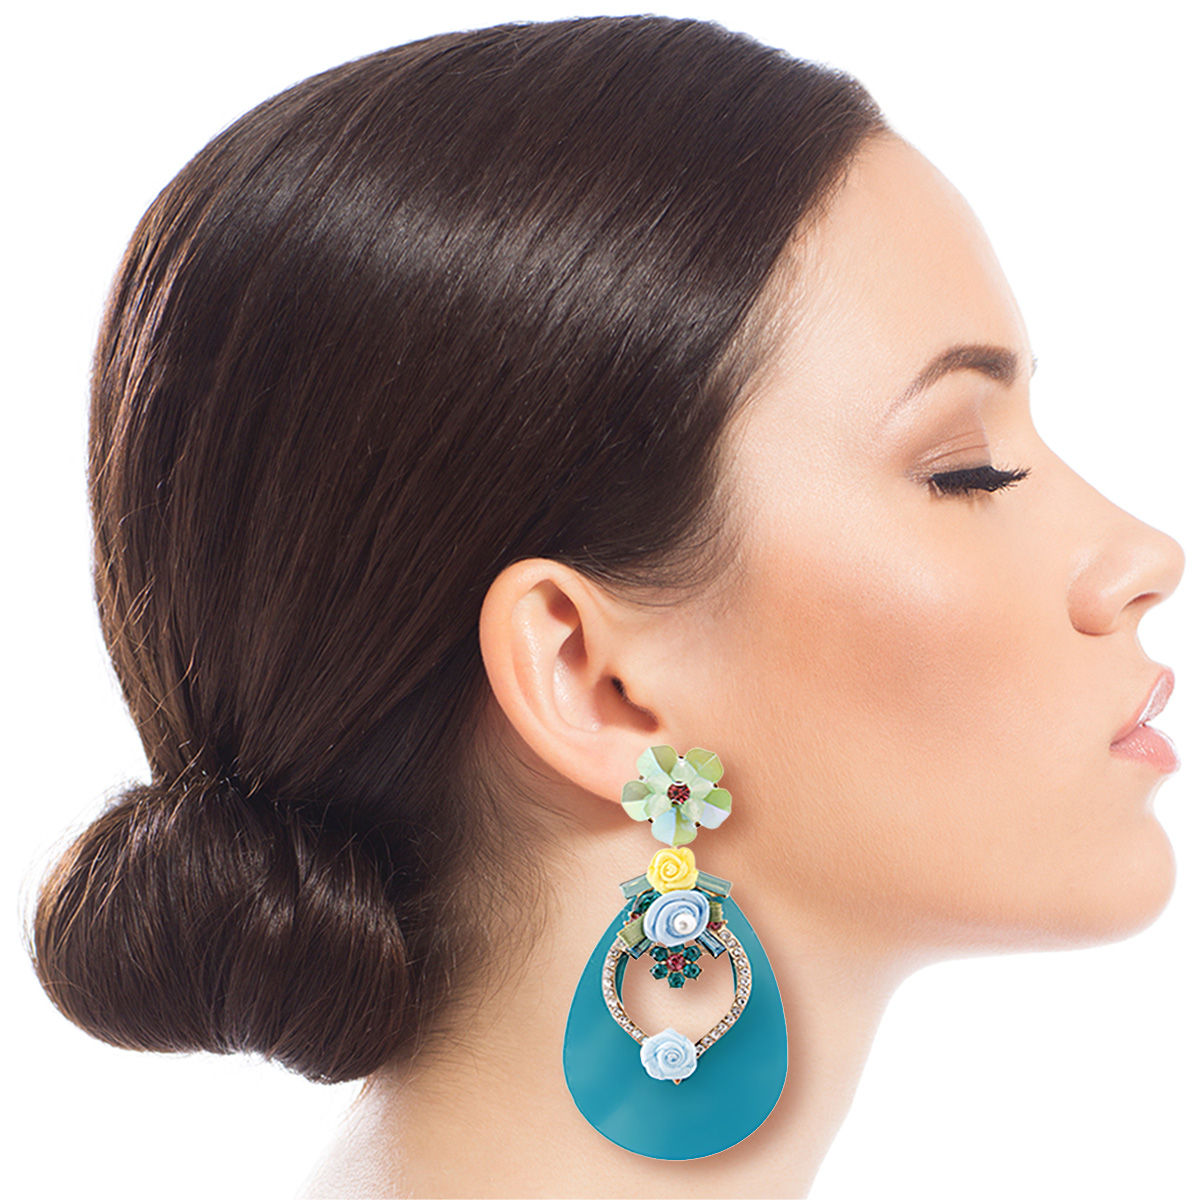 Aqua Teardrop Earrings with Rhinestone and Flower Detail|3.25 inches - Premium Wholesale Jewelry from Pinktown - Just $16! Shop now at chiquestyles